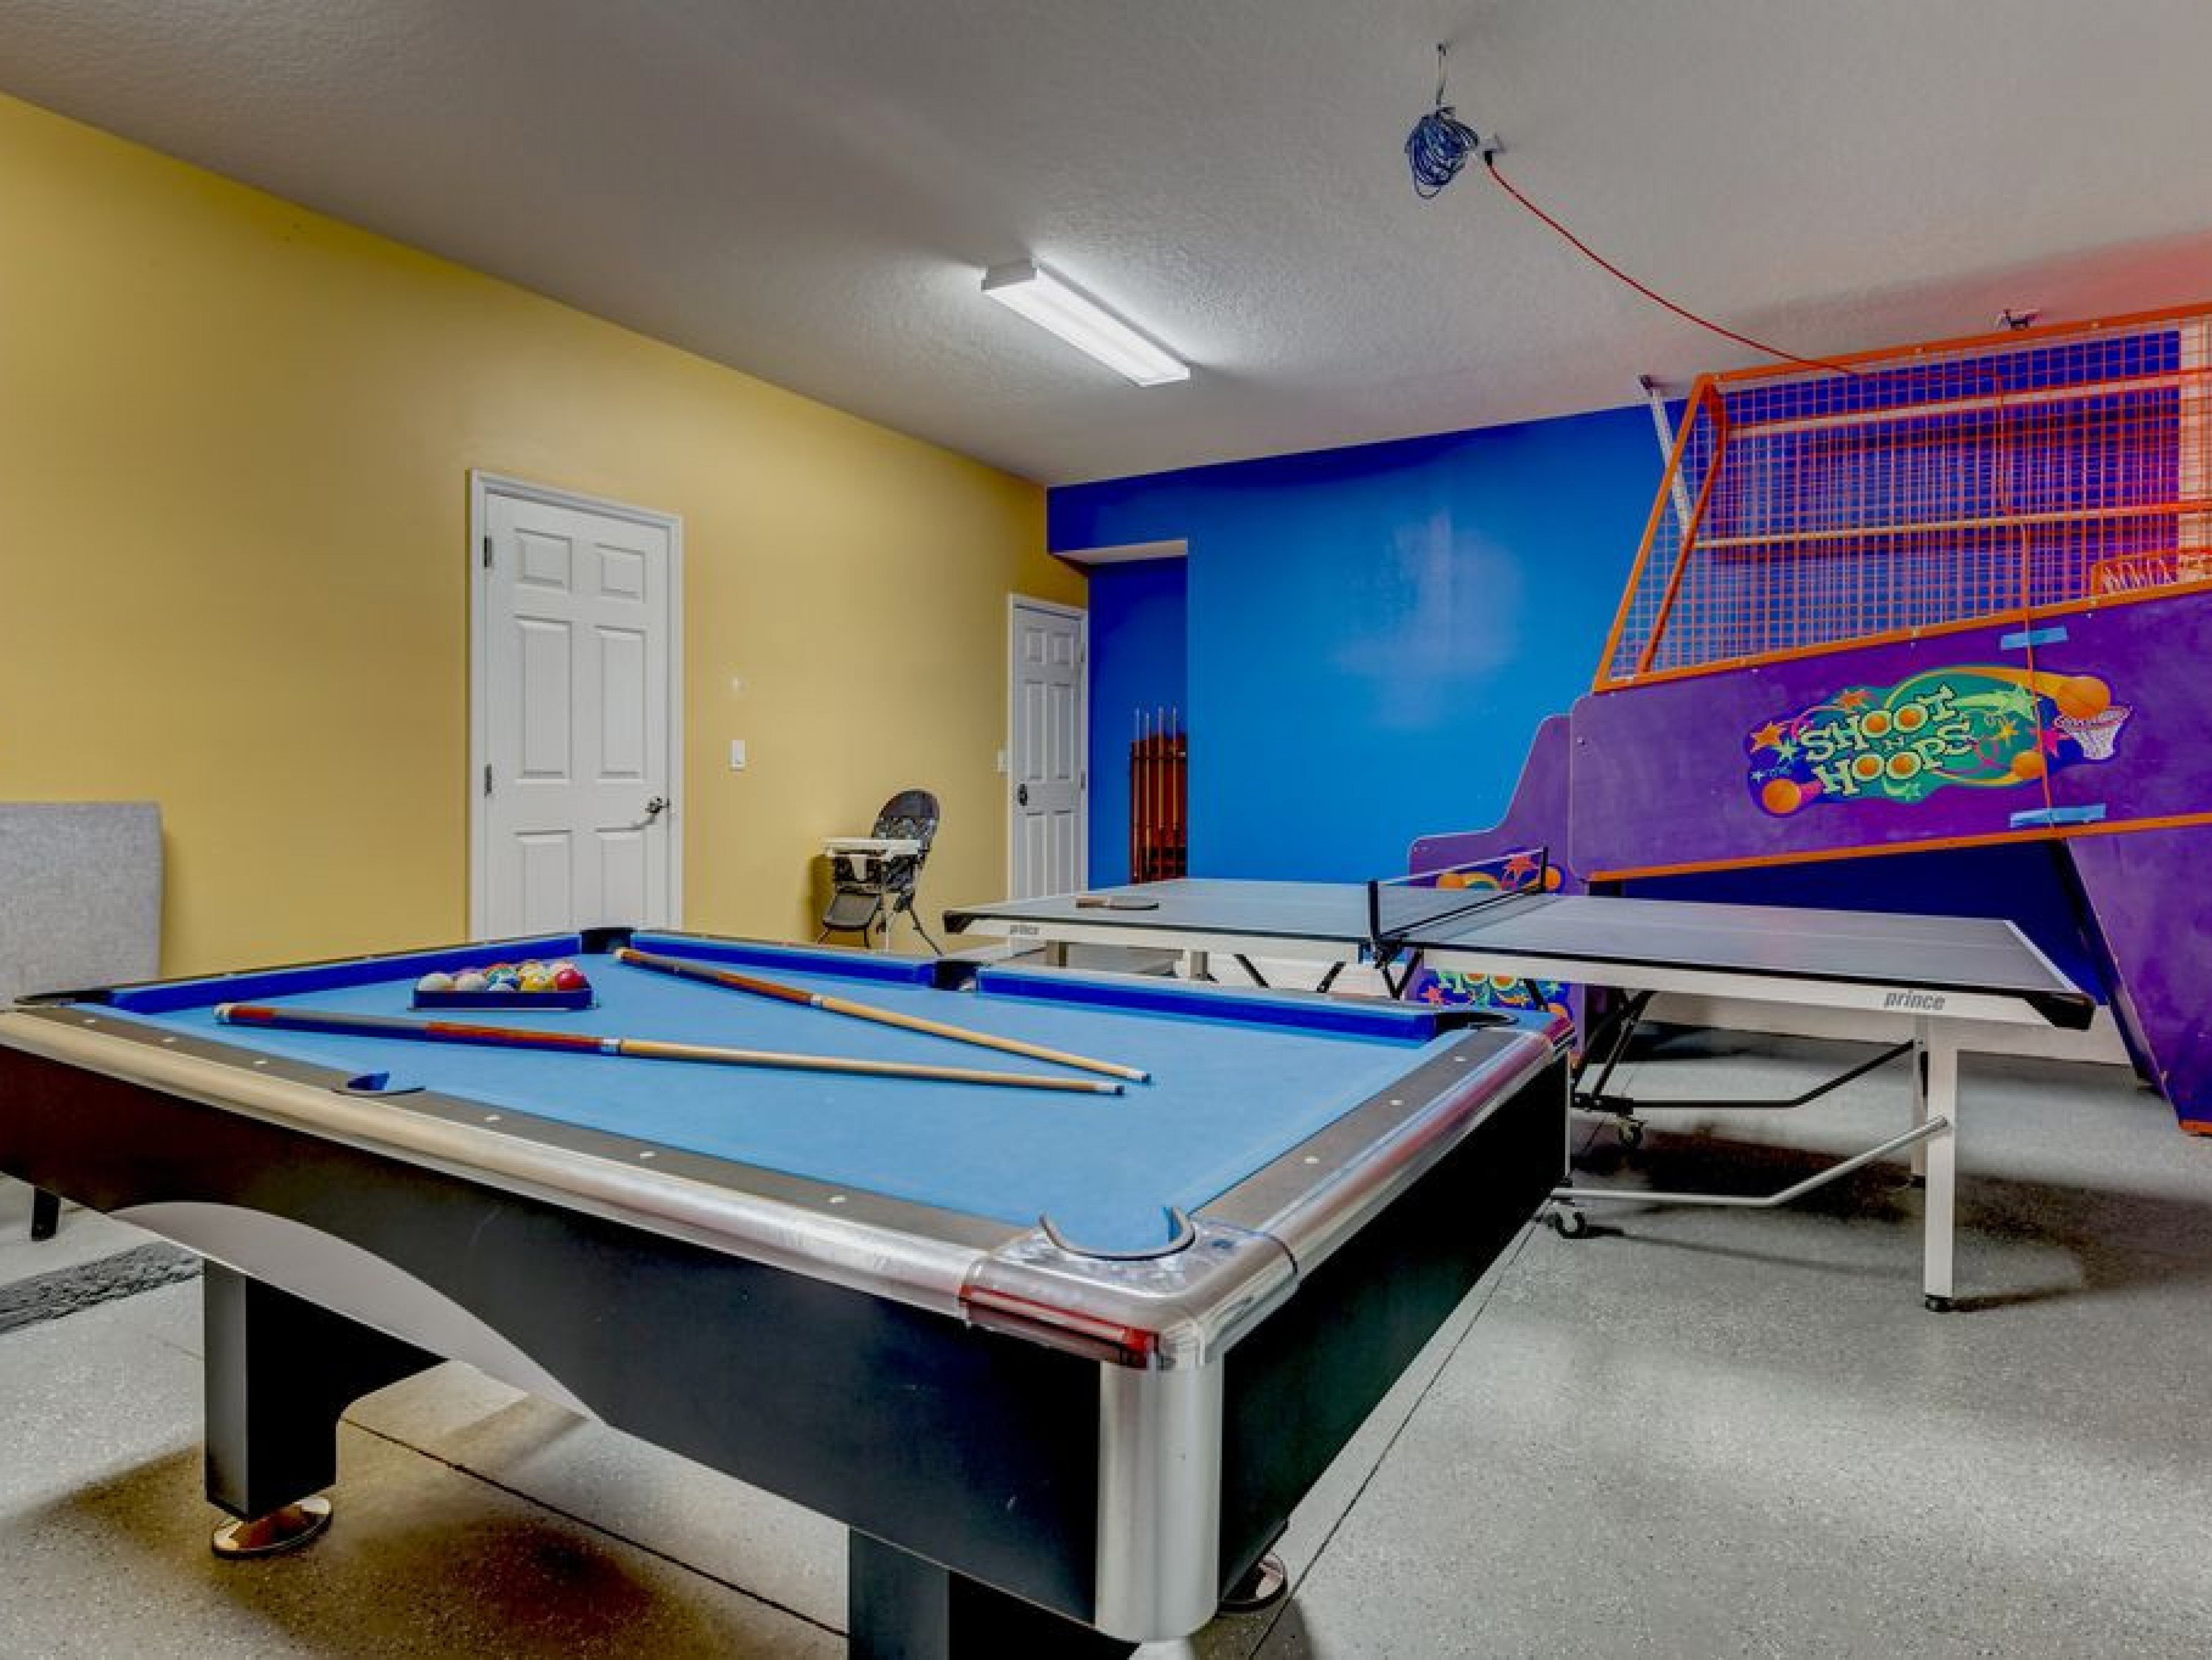 Solterra Resort 10 vacation rental with bowling alley and game room